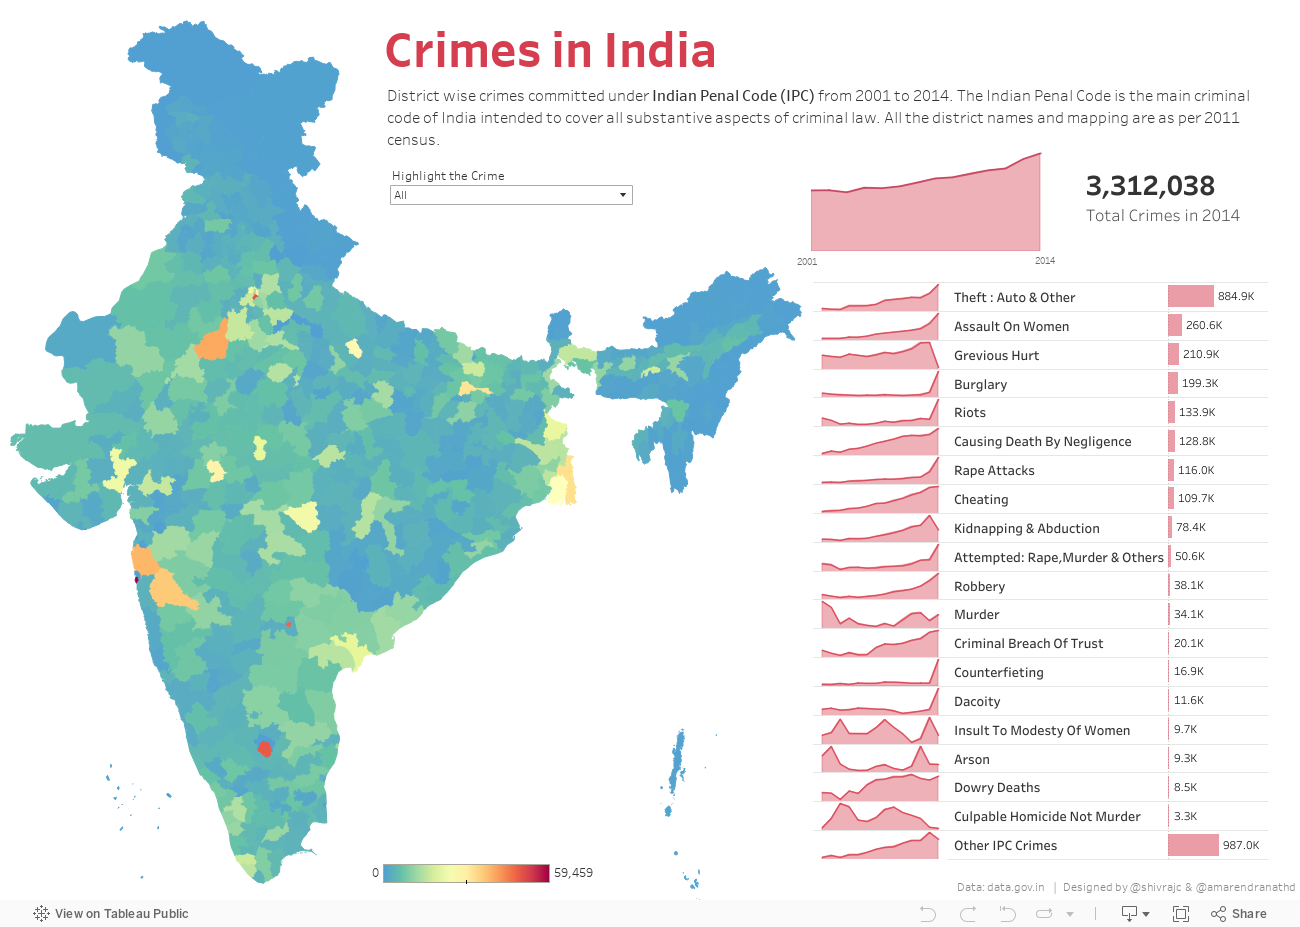 Crimes in India 